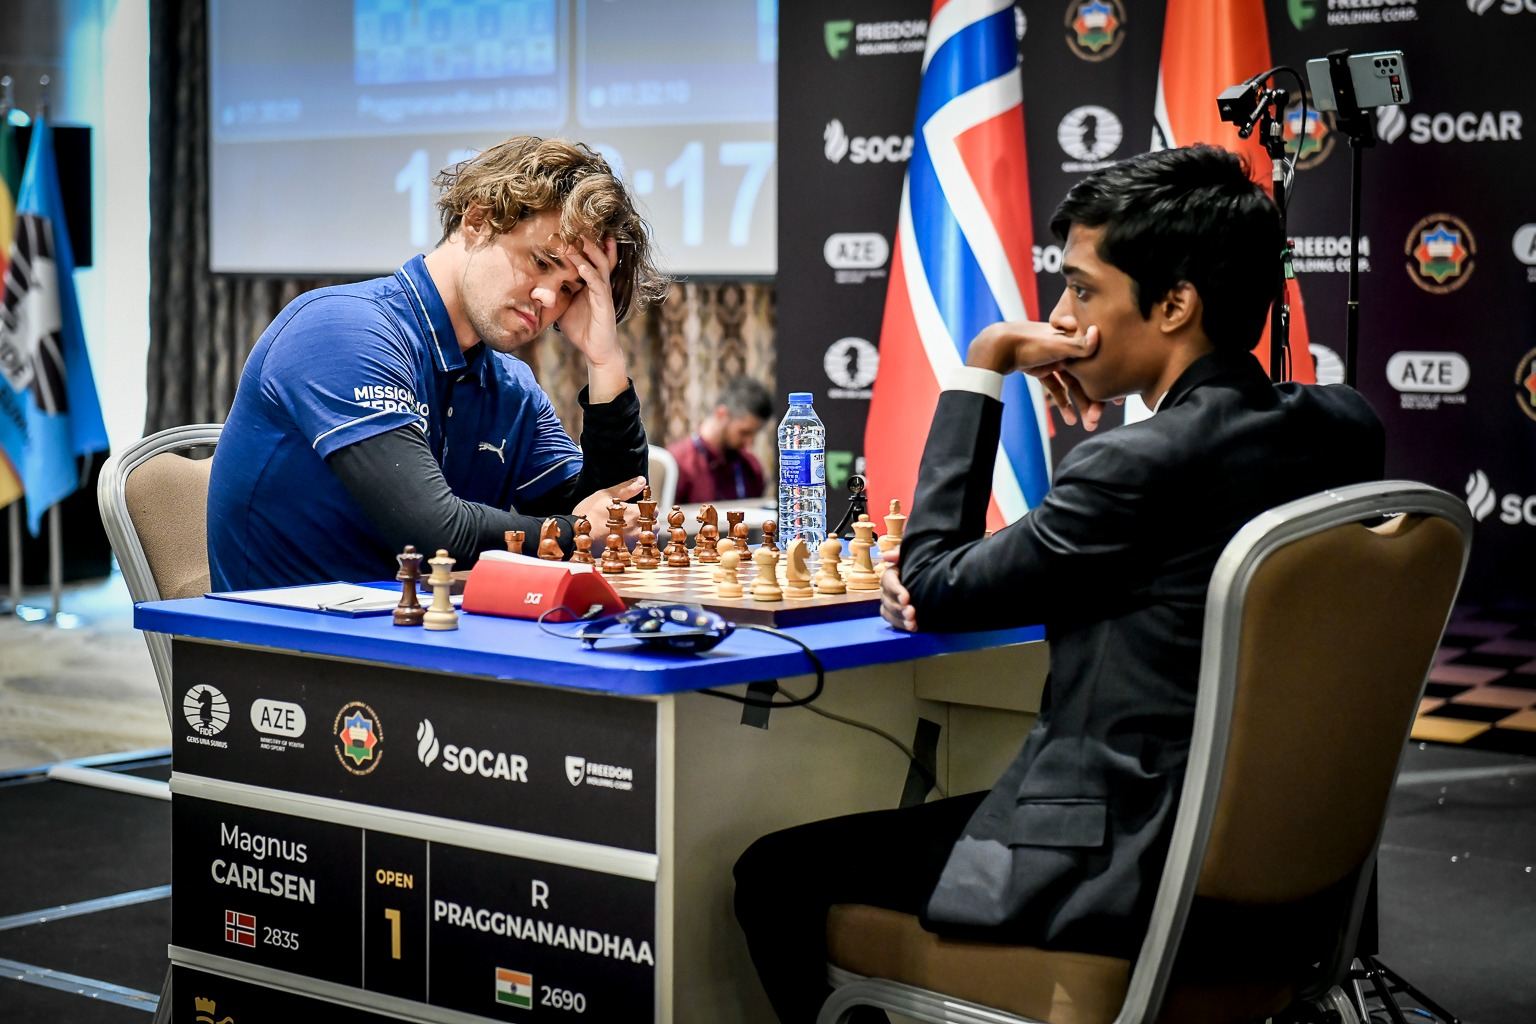 When is the FIDE Chess World Cup and what is the prize fund?